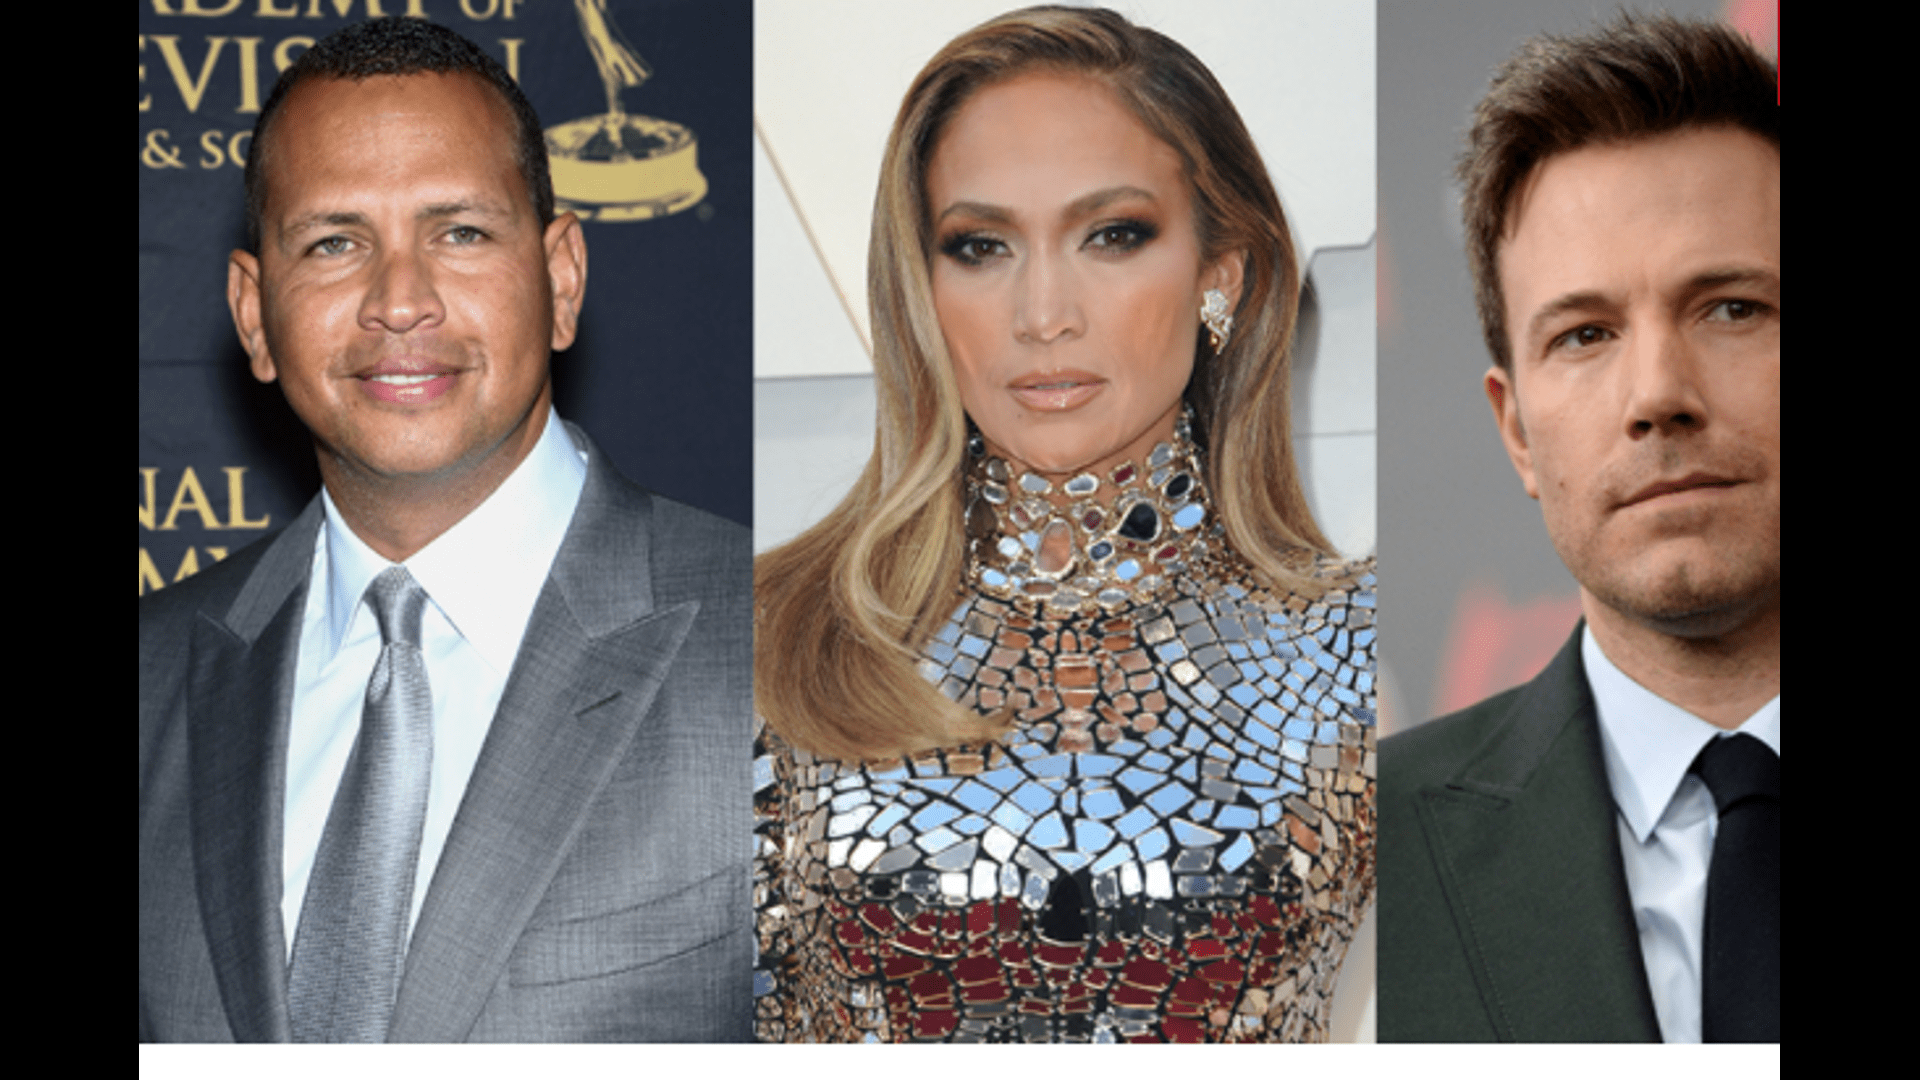 How the ex reacted to the engagement of Jennifer Lopez and Ben Affleck